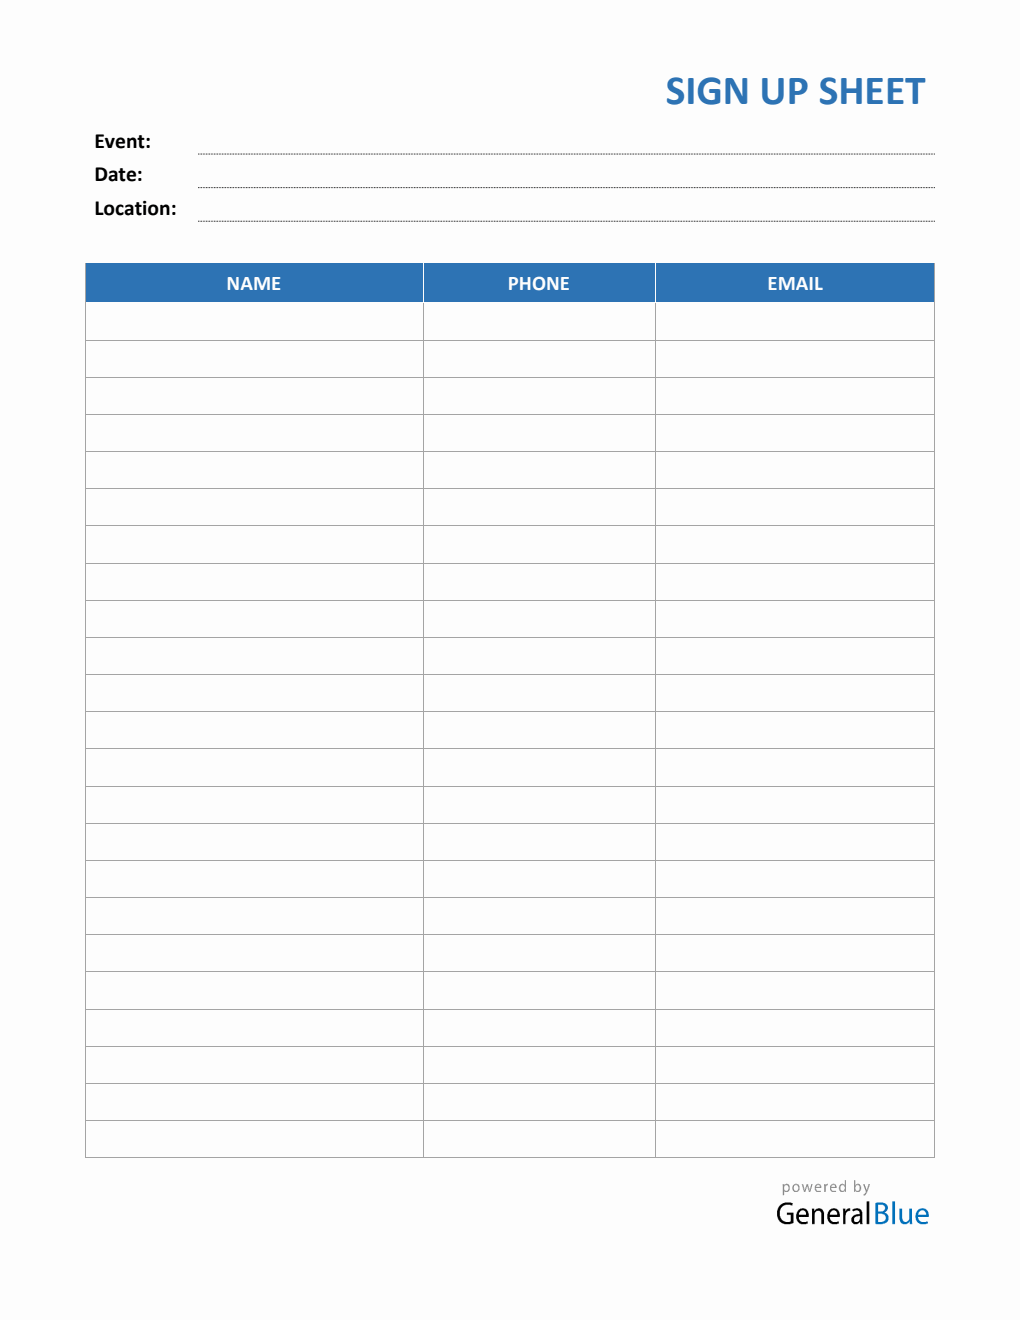 Event Sign Up Sheet in Word